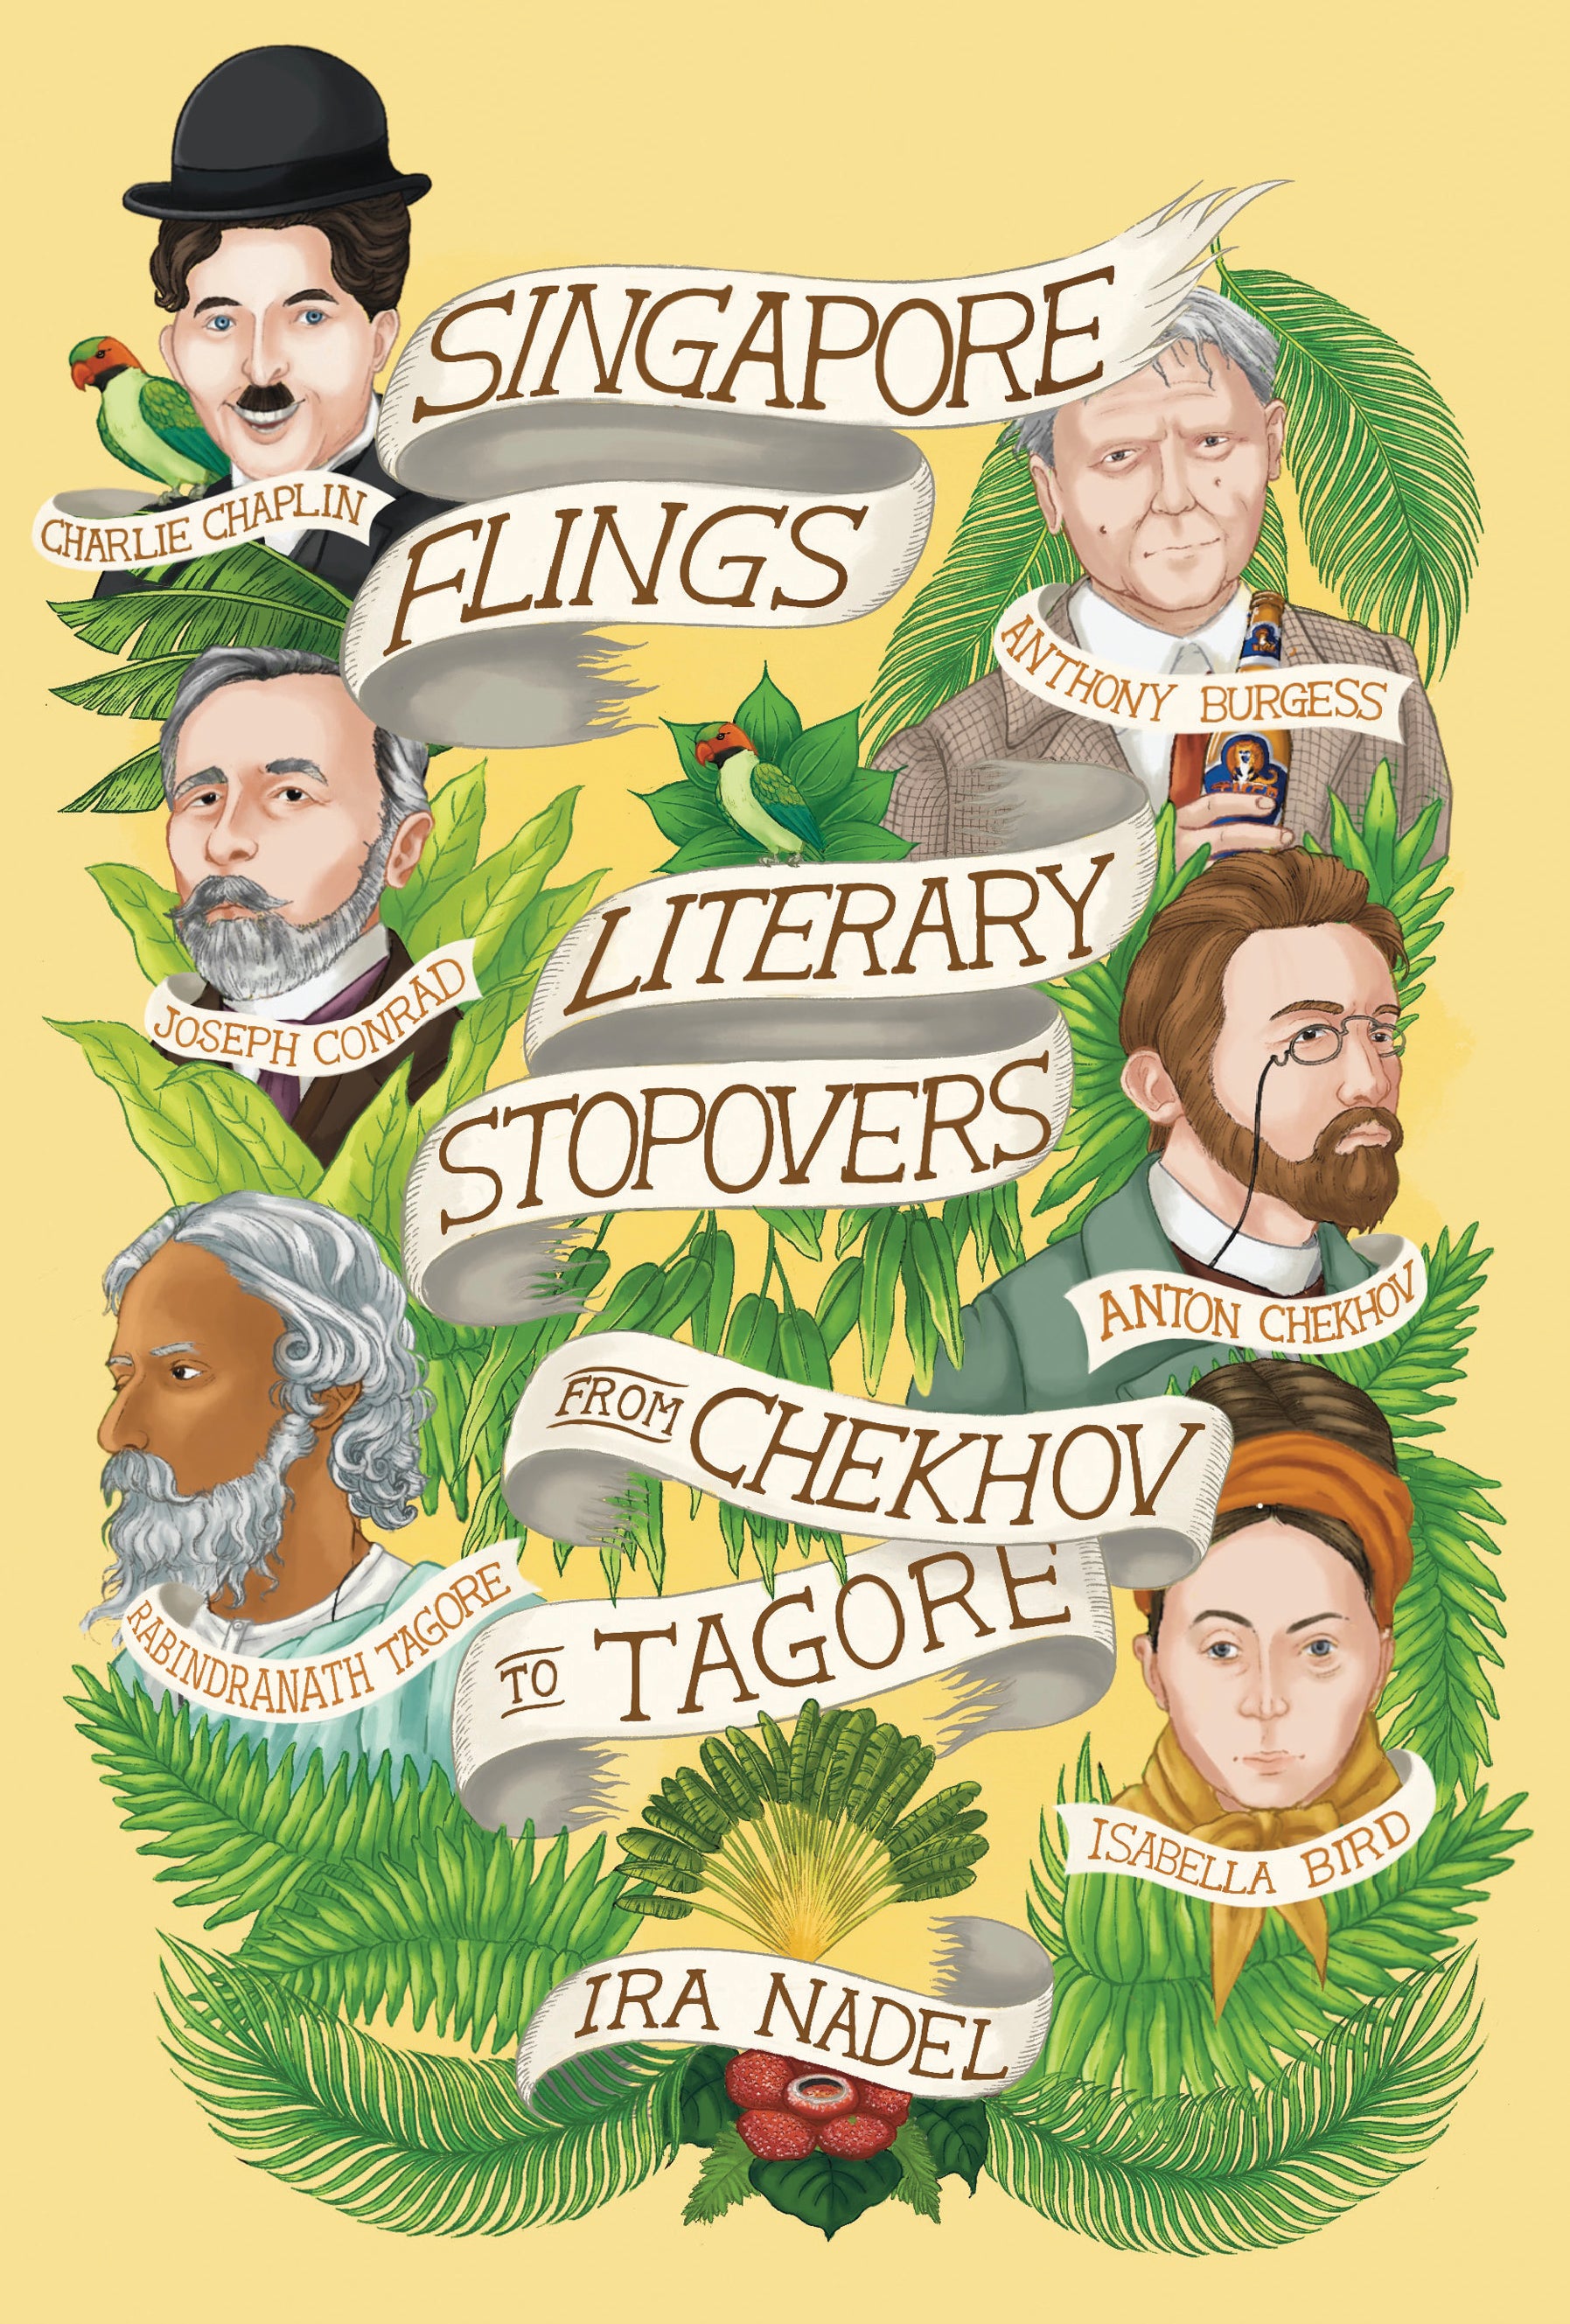 Singapore Flings: Literary Stopovers from Chekhov to Tagore